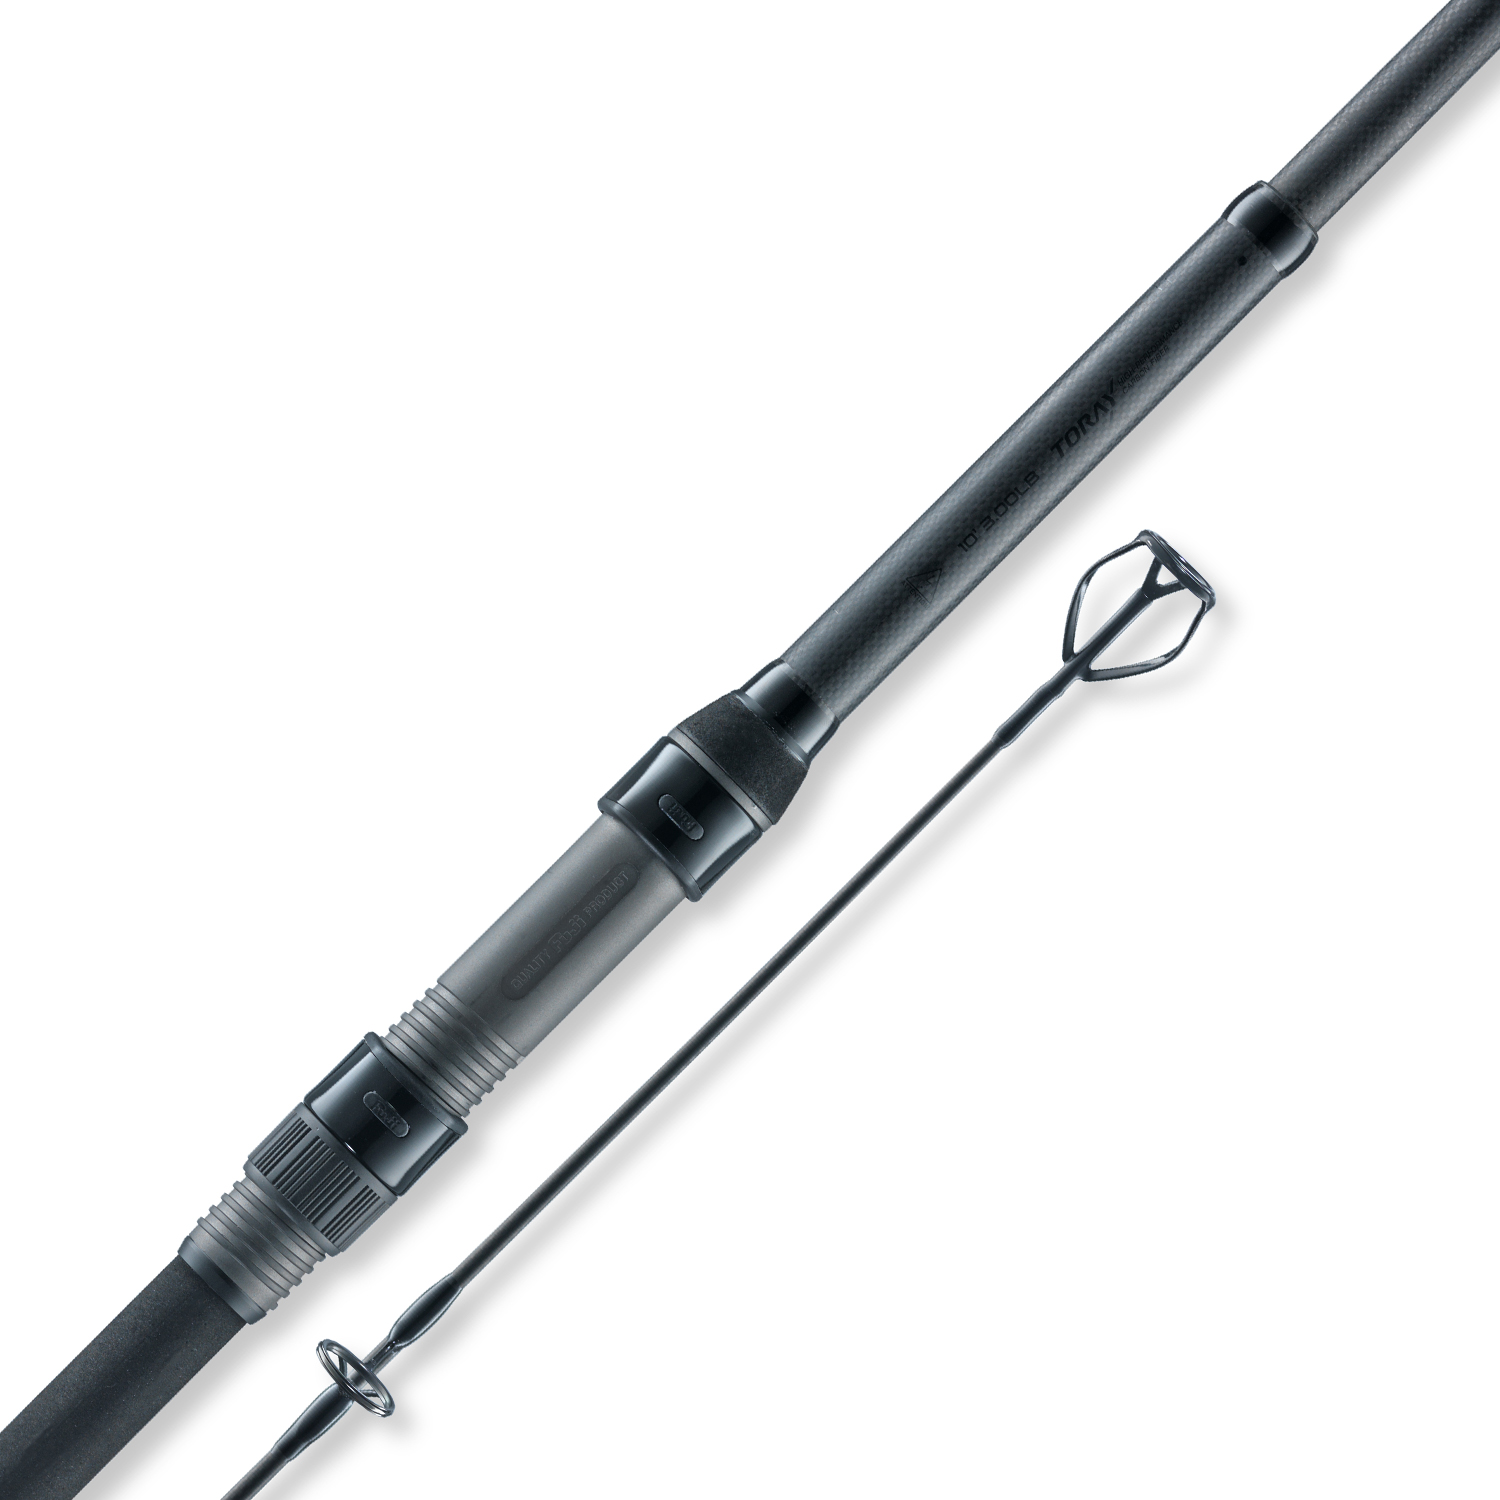 Sonik Insurgent 9ft 3lb -two rods, double sleeve and net and